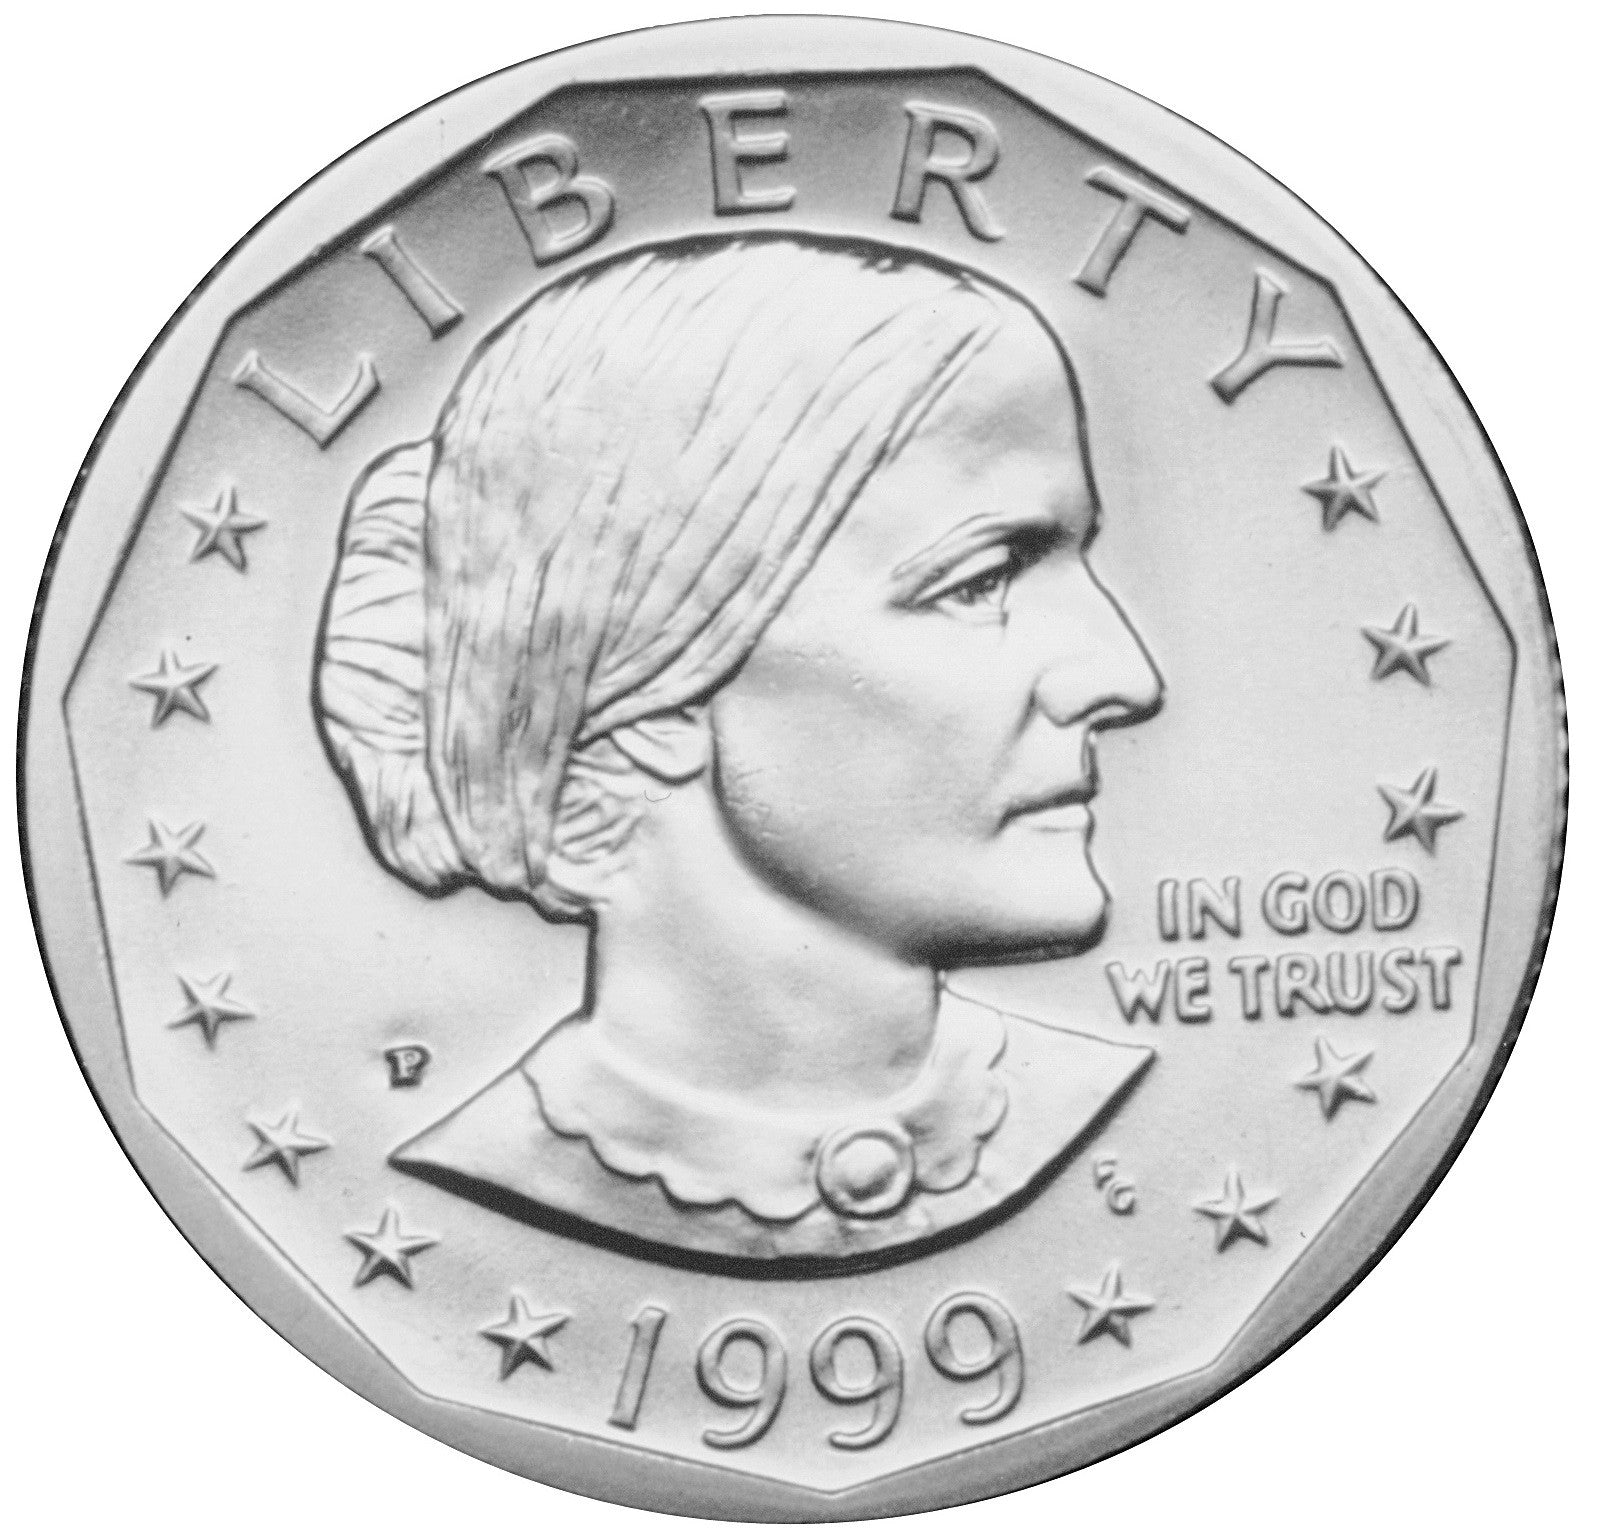 susan b anthony coin 1999 value